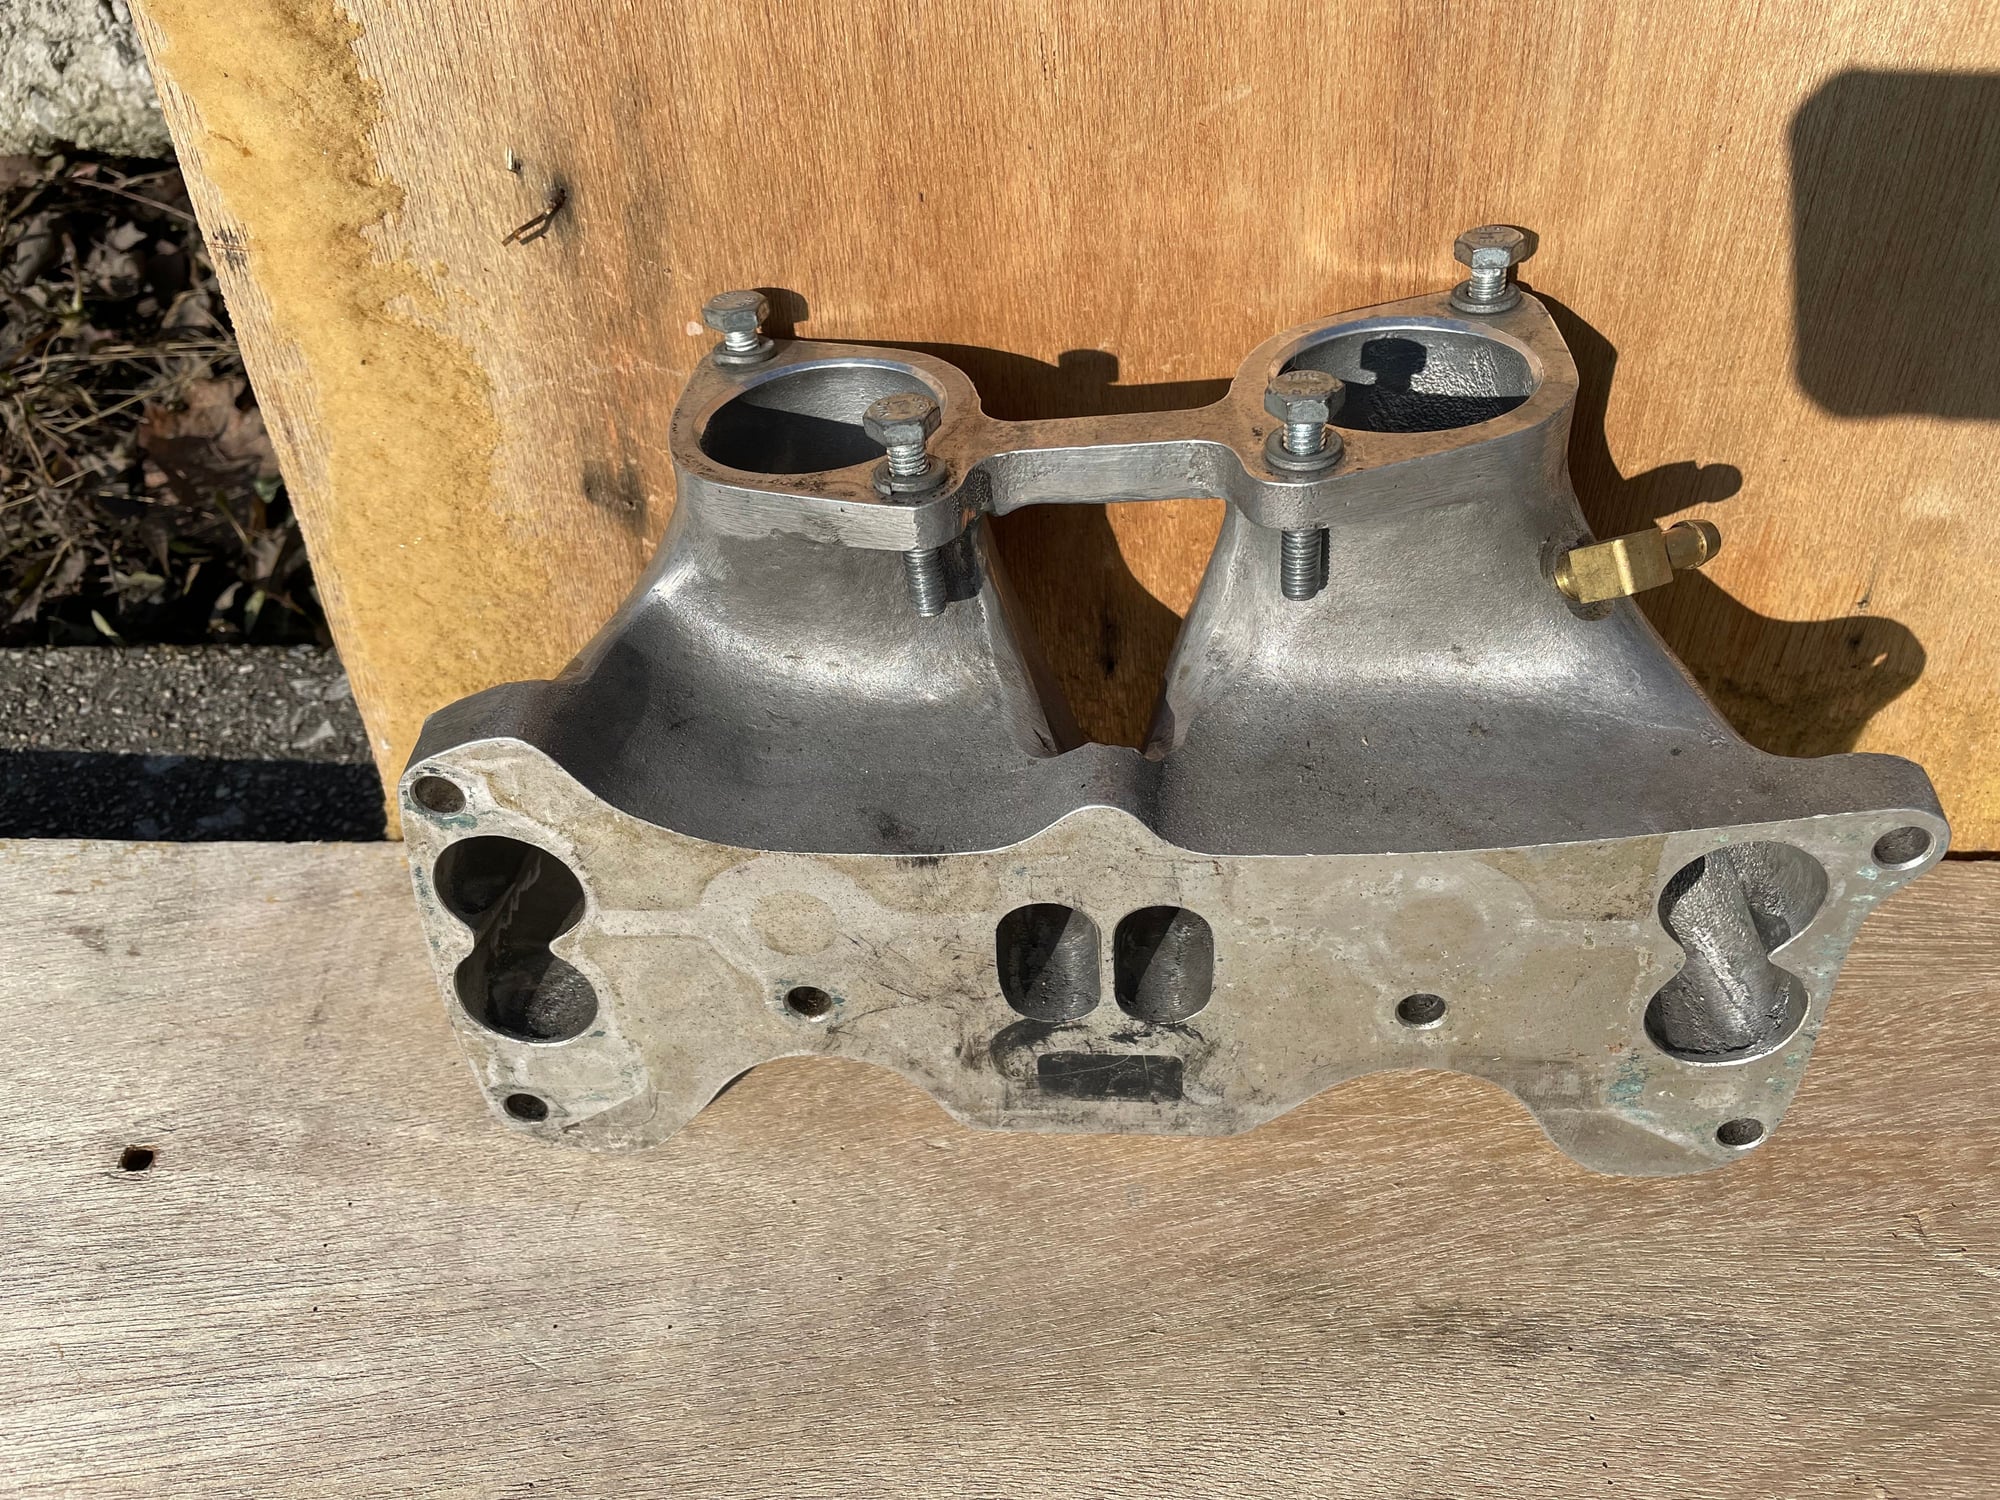 Engine - Intake/Fuel - 6 Port Racing Beat Weber/Throttle Body Down Draft Intake Manifold - Used - 1984 to 1991 Mazda RX-7 - Chicago, IL 60641, United States